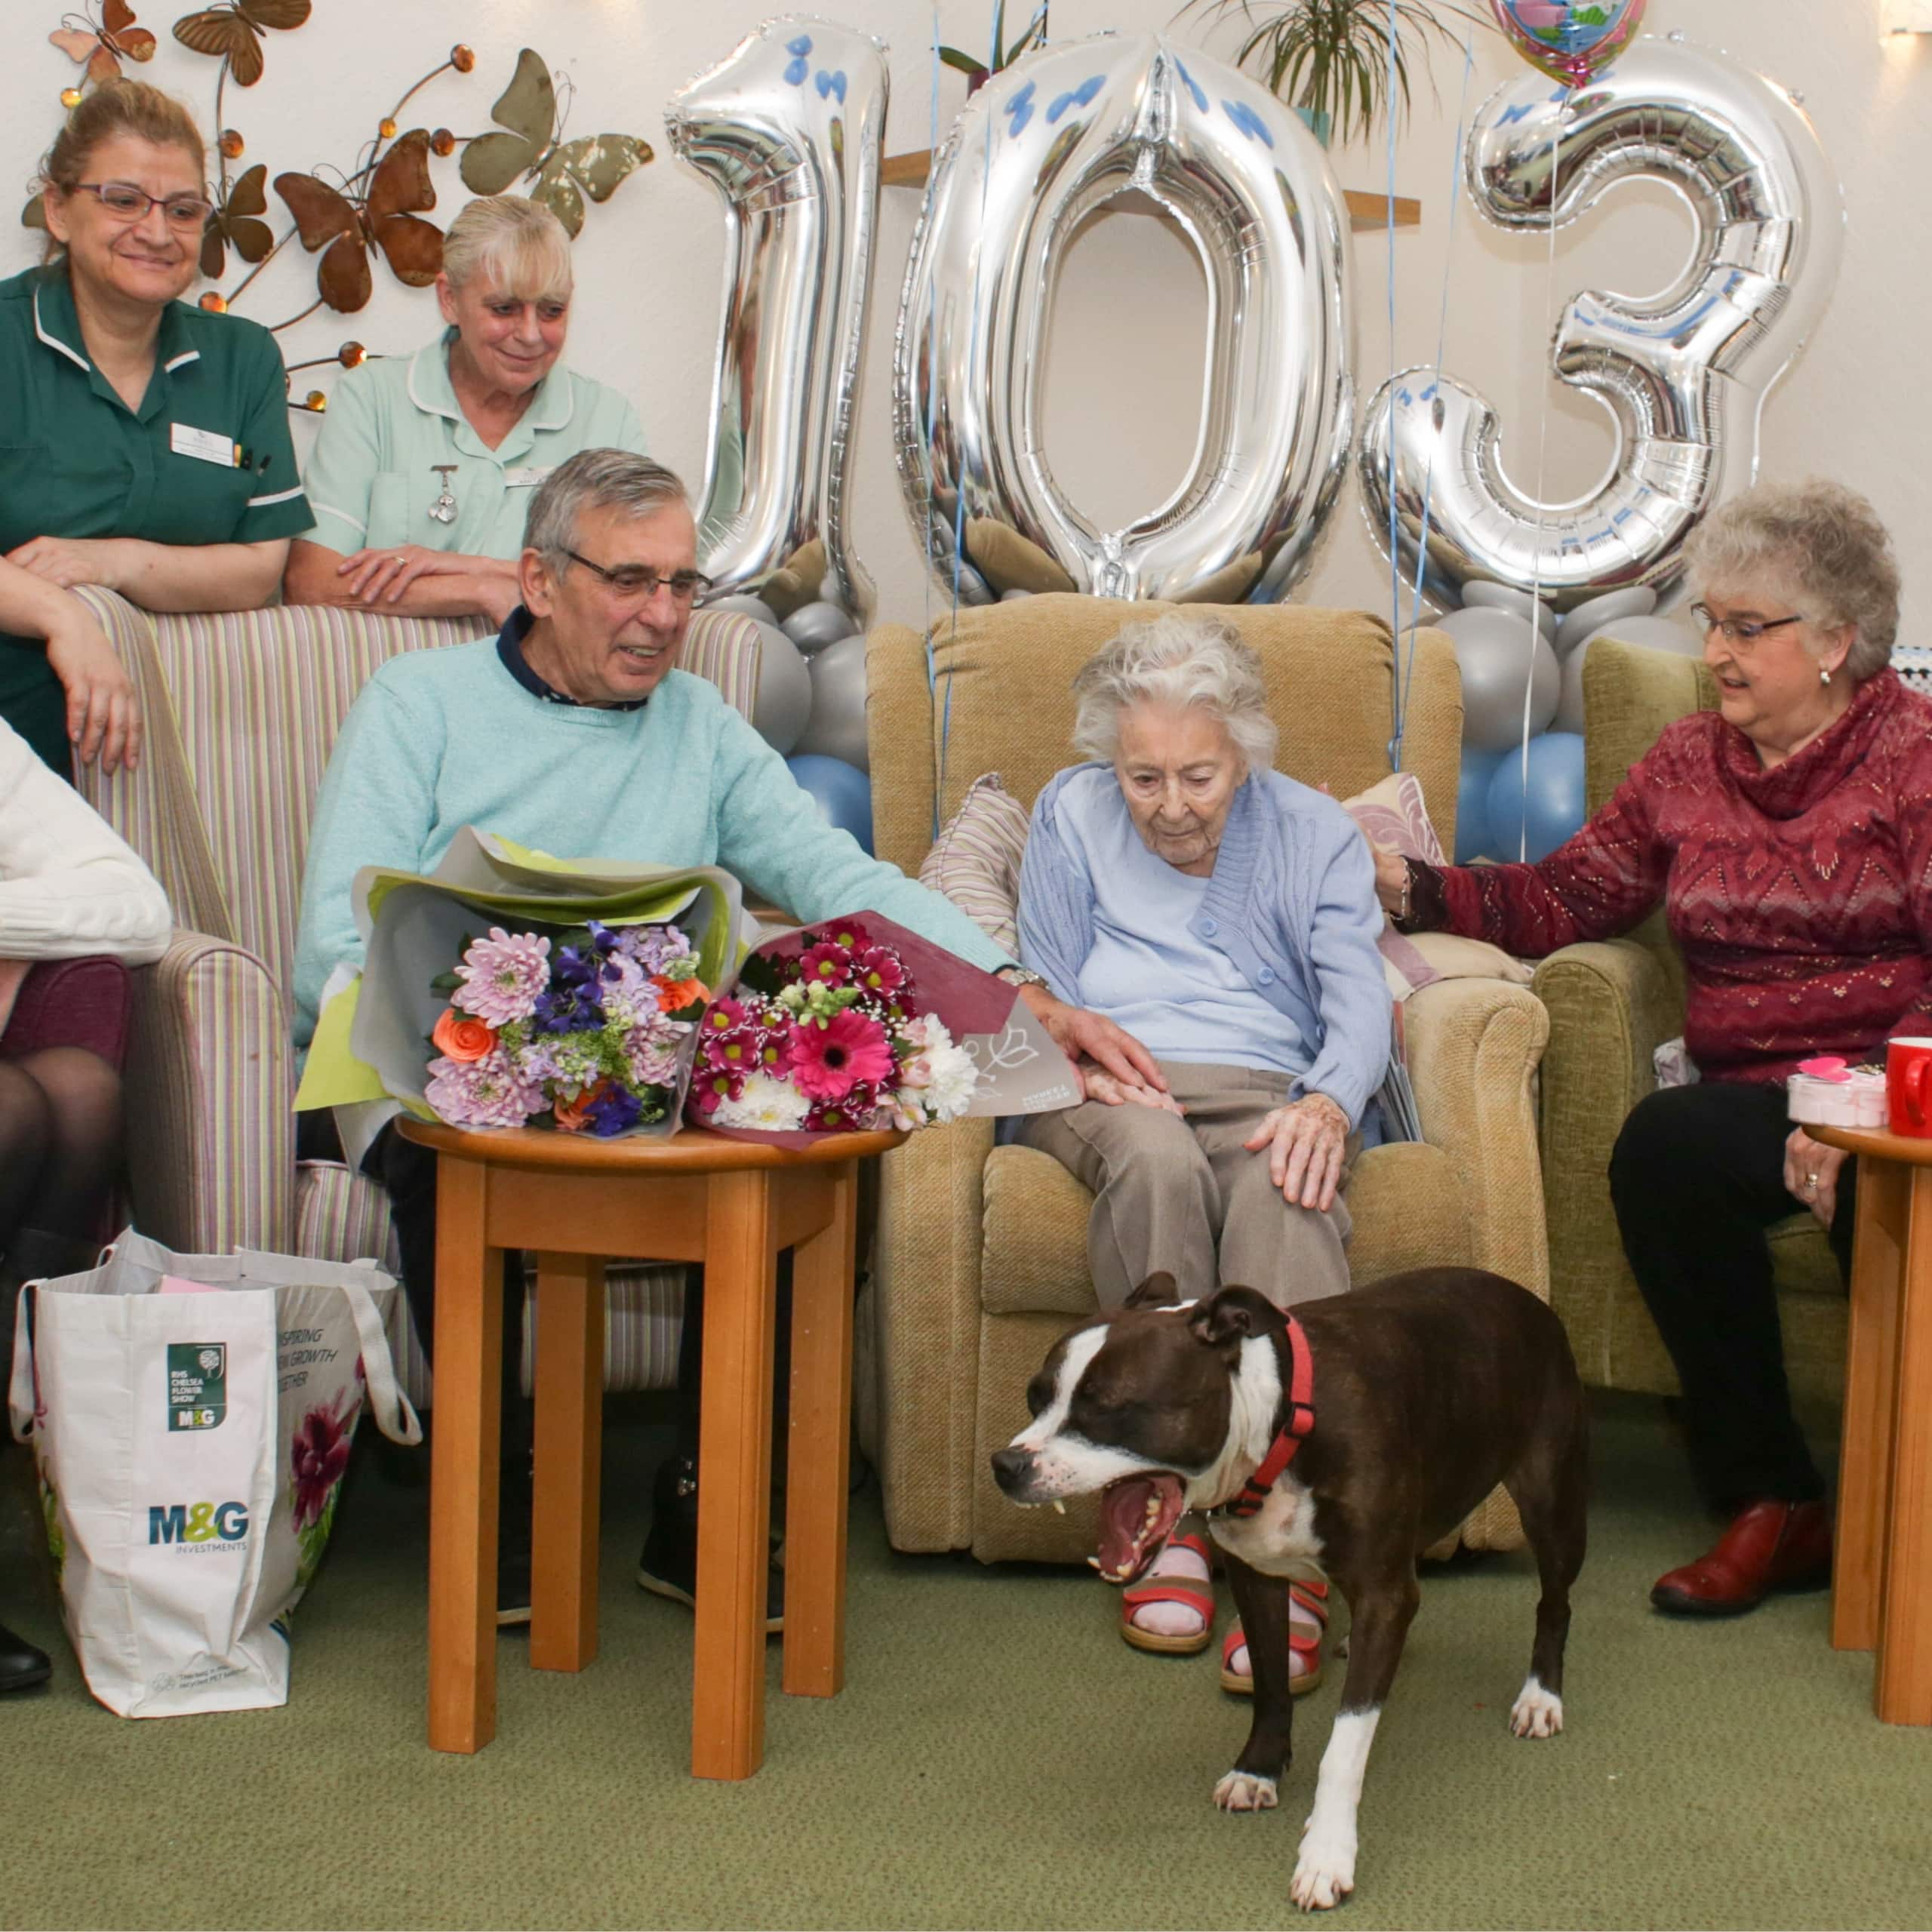 Westerham Place Care Home resident Mickie surrounded by friends and family celebrating her birthday.